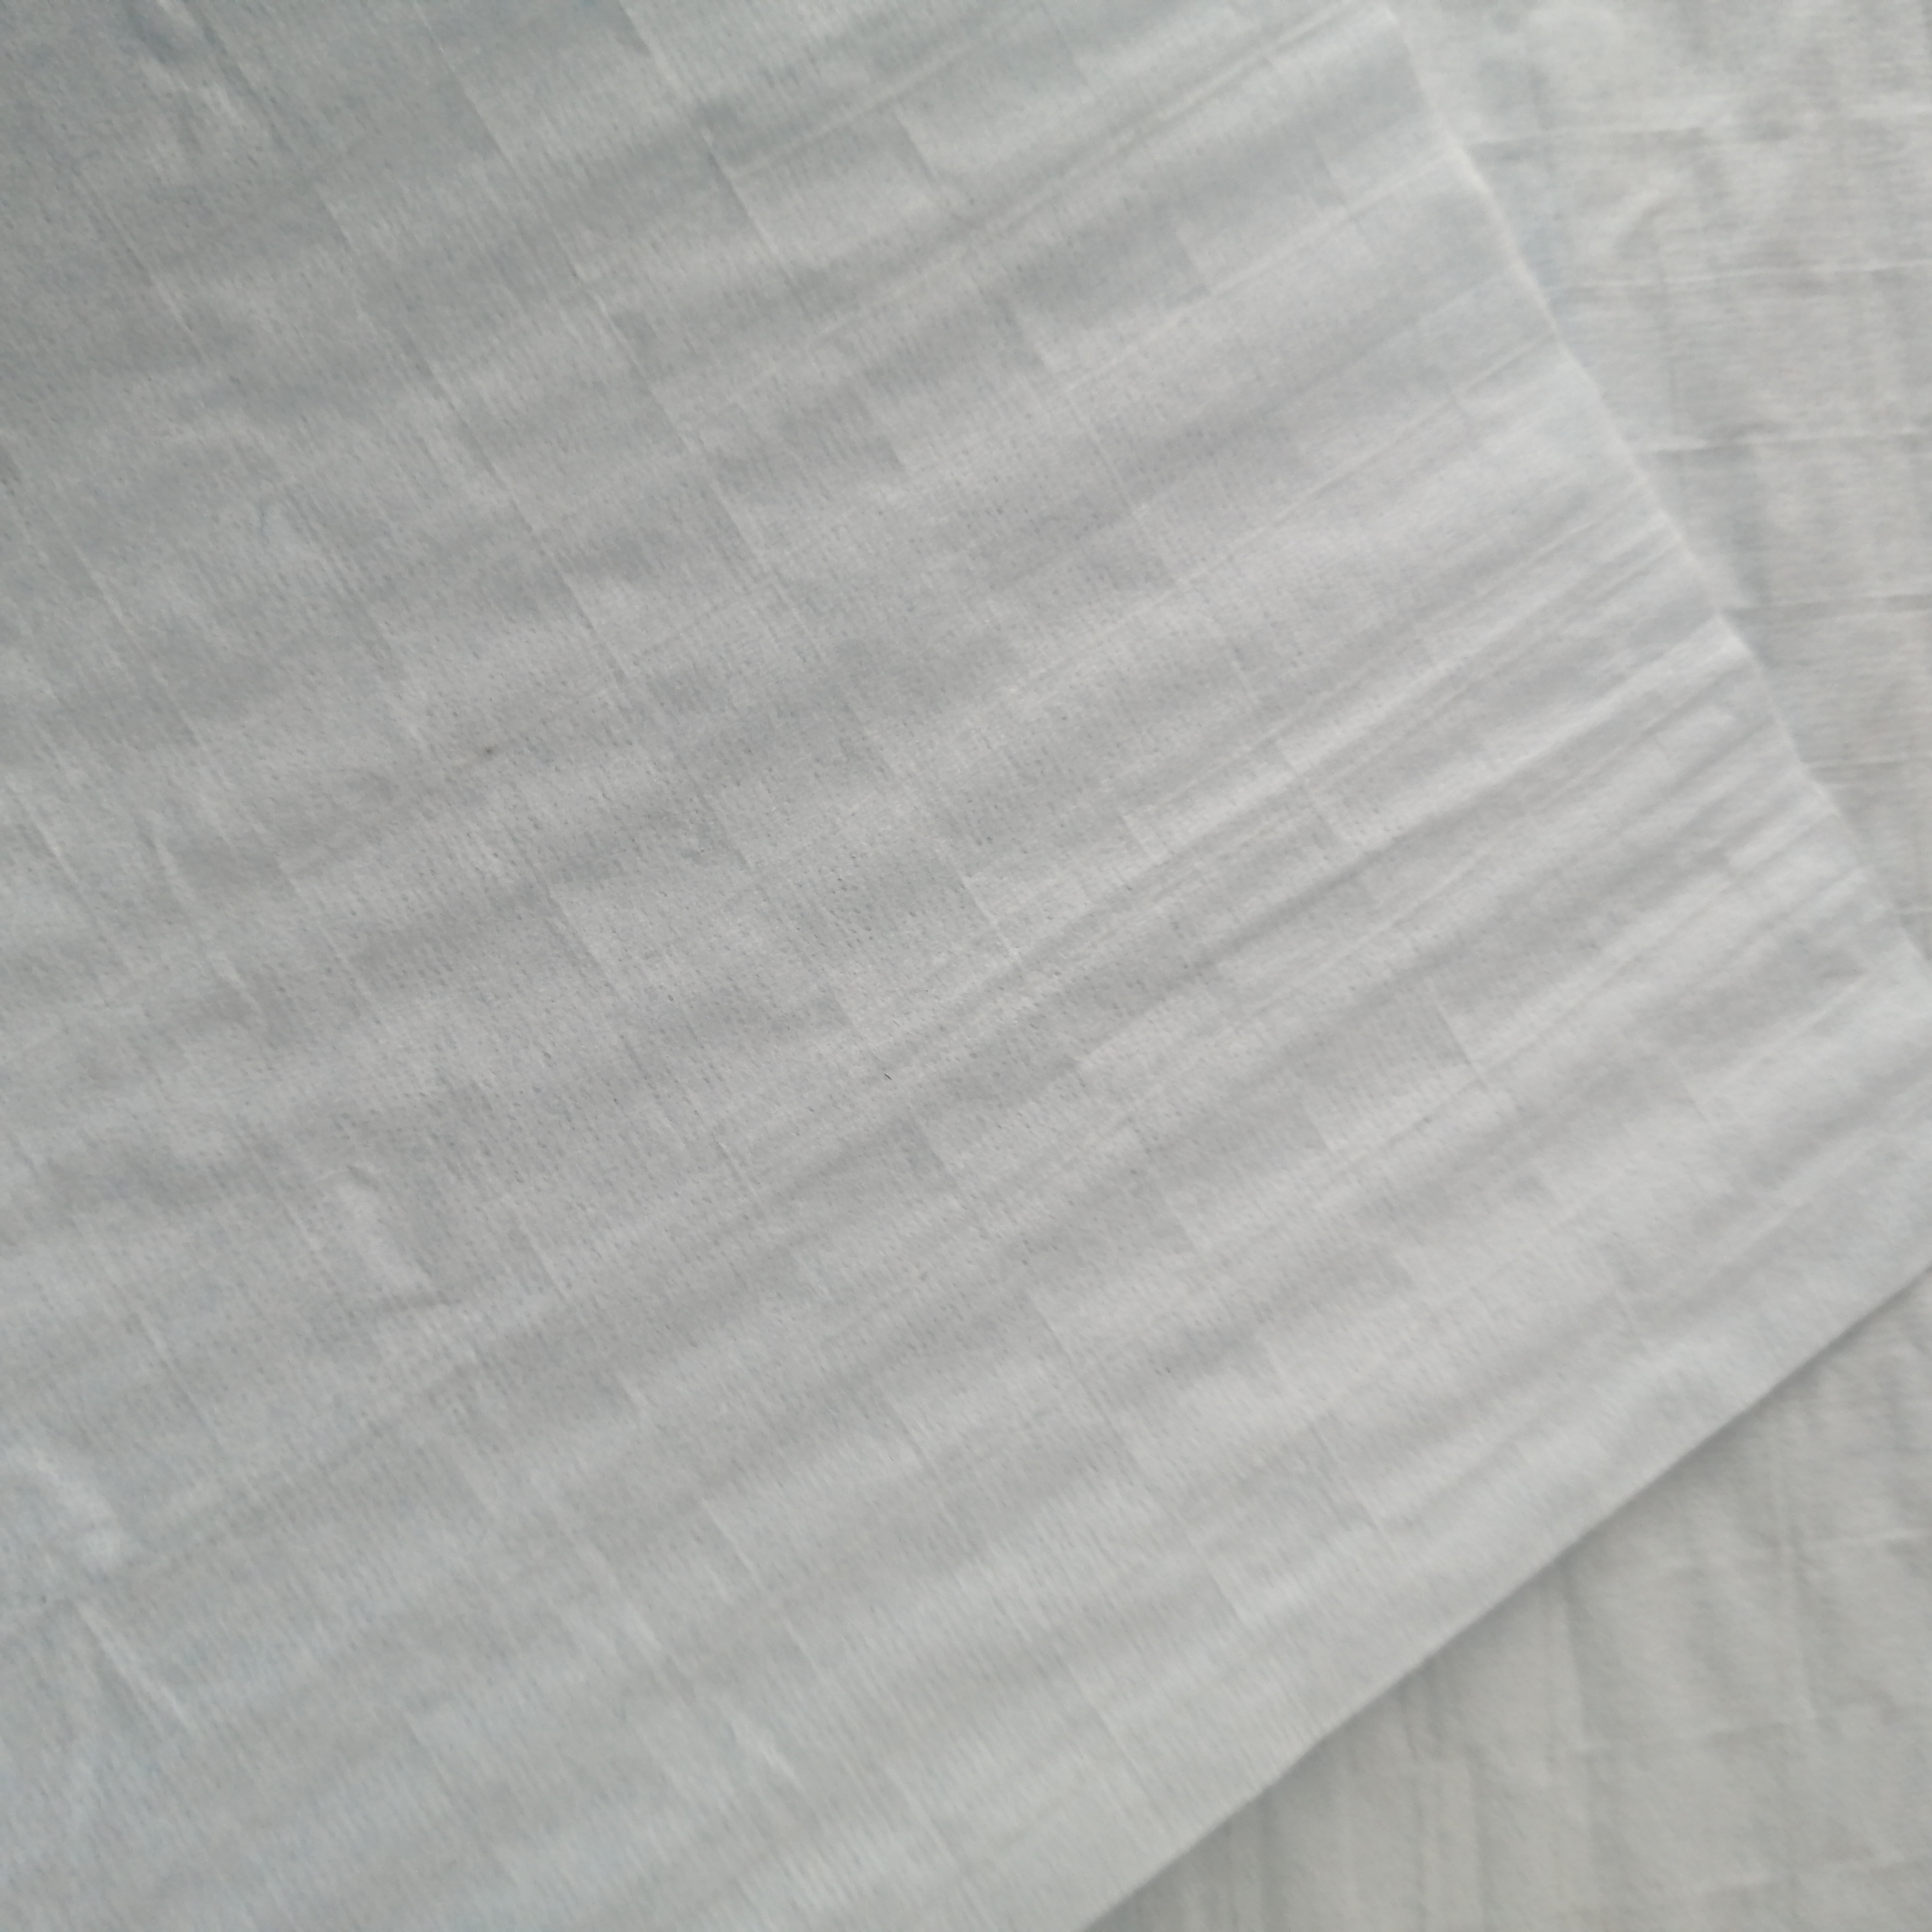 Polyester mesh Laid Scrims for medical blood-absorbing paper in surgical kit (5)